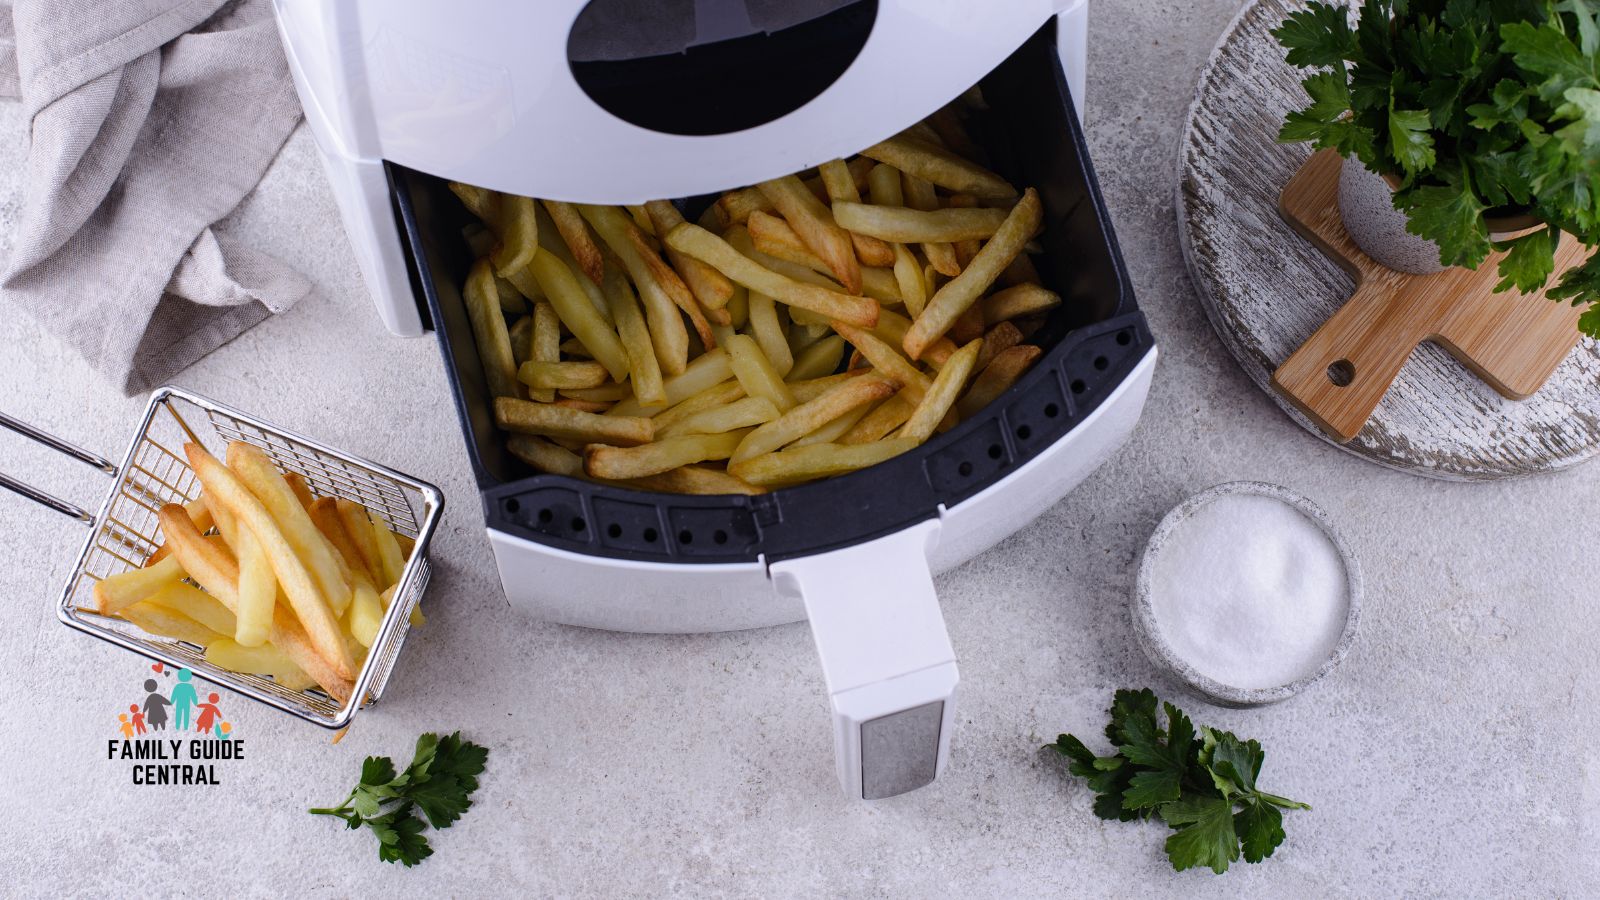 Air fryer making french fries - familyguidecentral.com